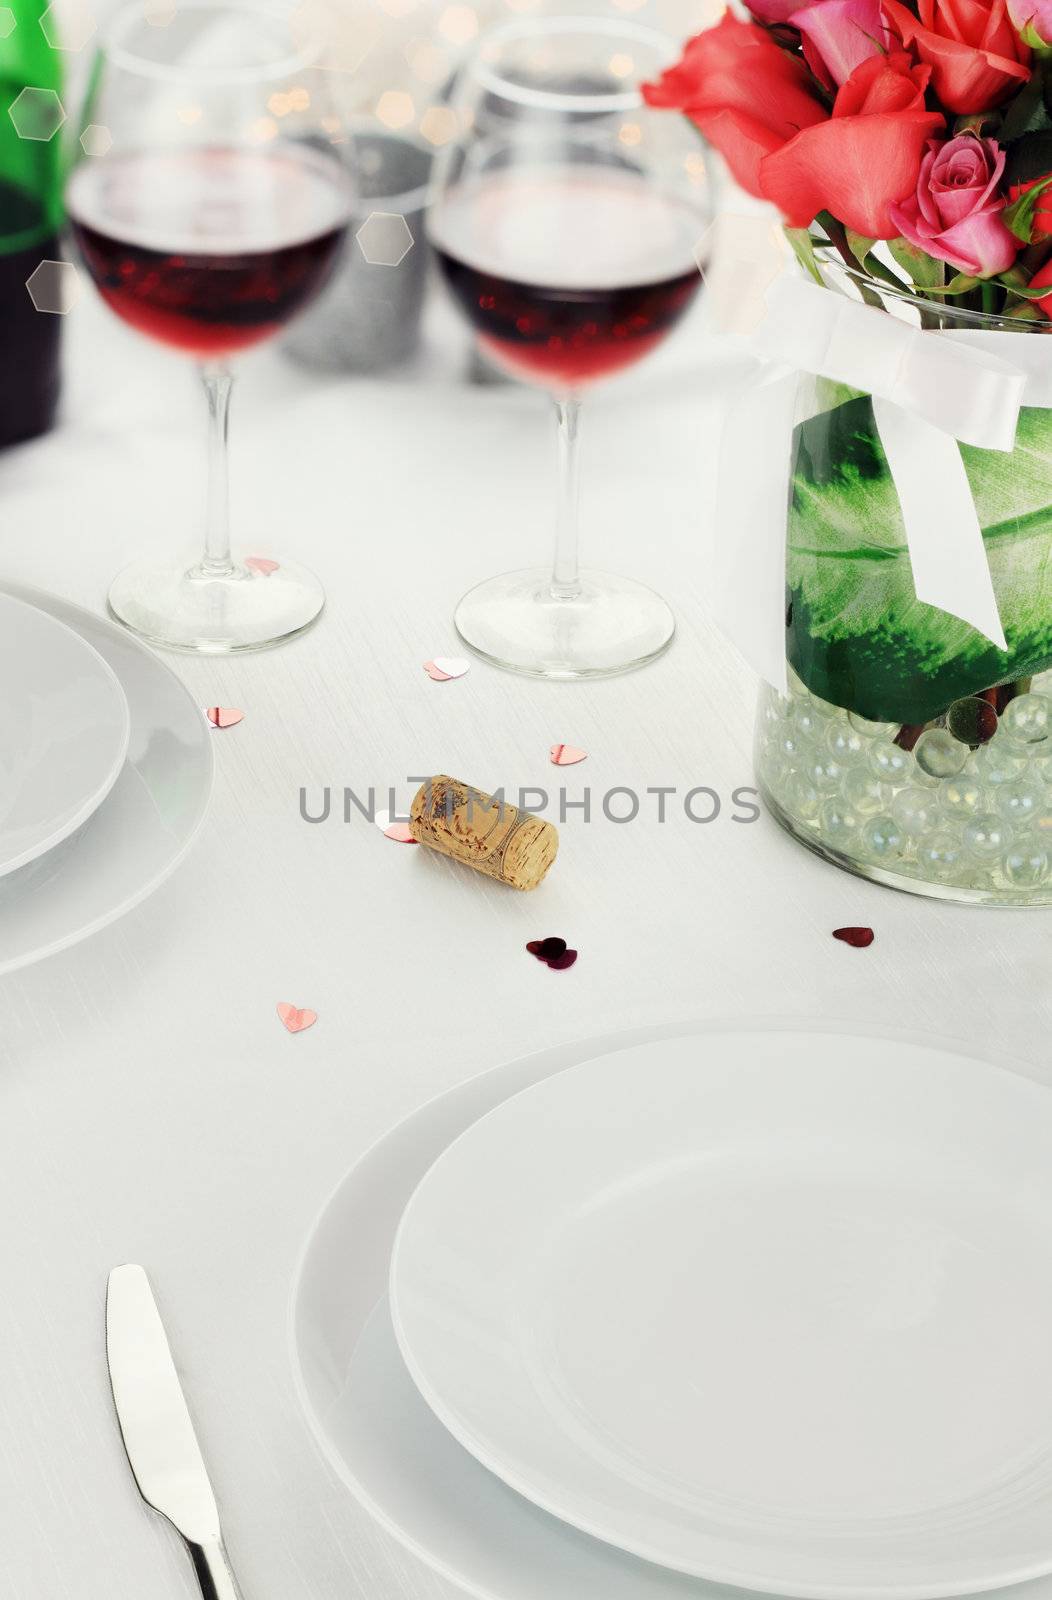 Romantic table setting with selective focus on lower portion of image.